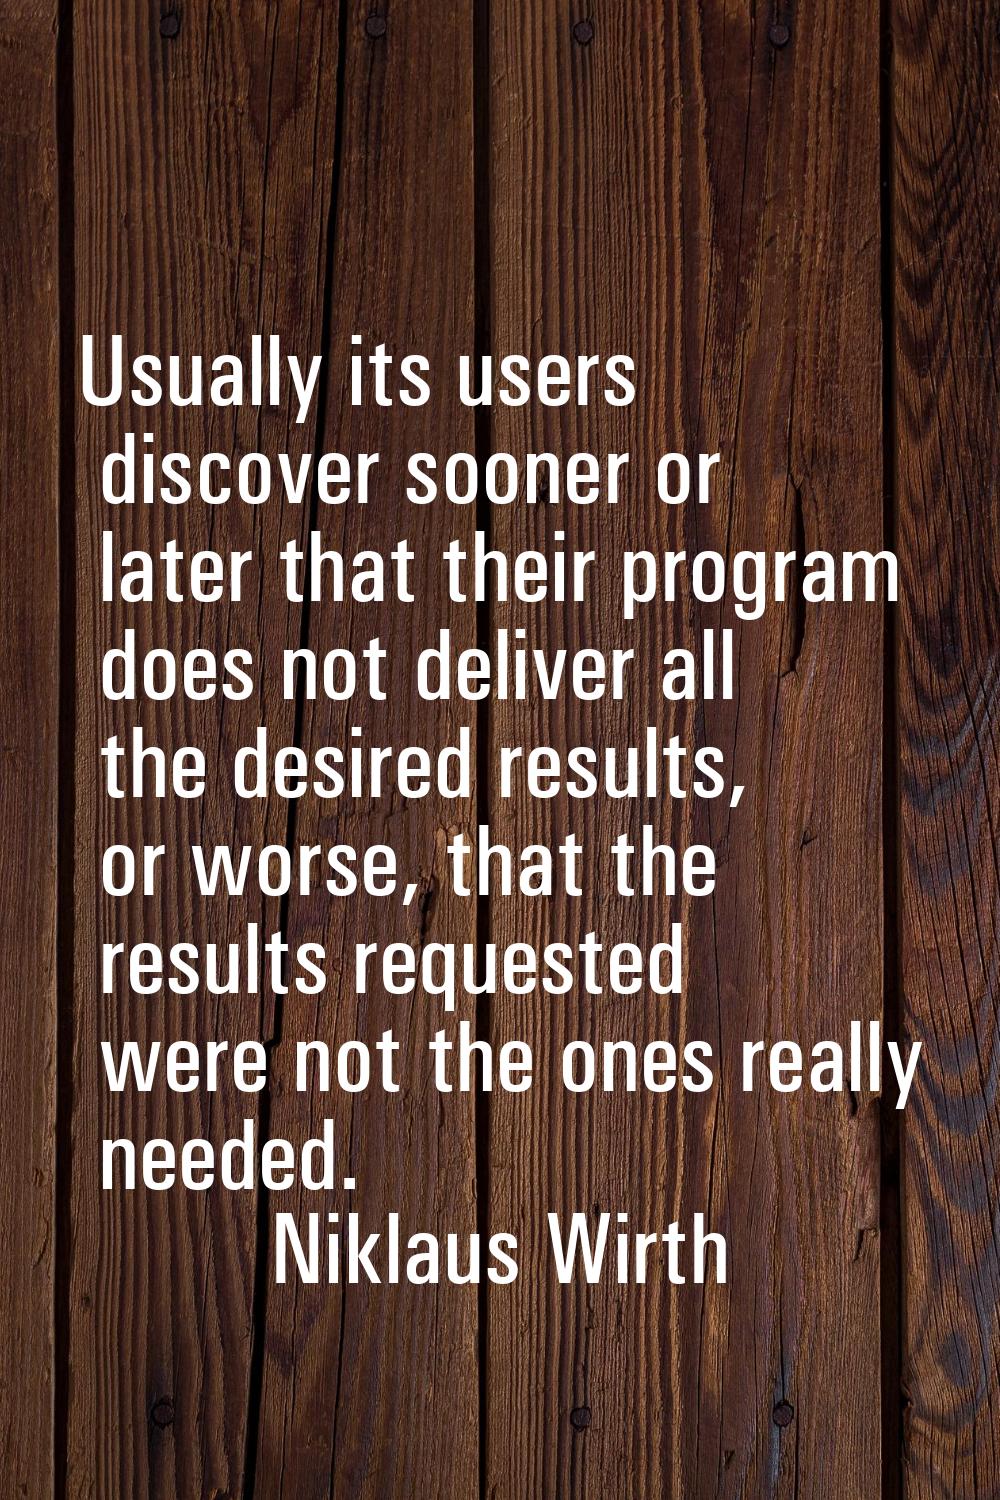 Usually its users discover sooner or later that their program does not deliver all the desired resu